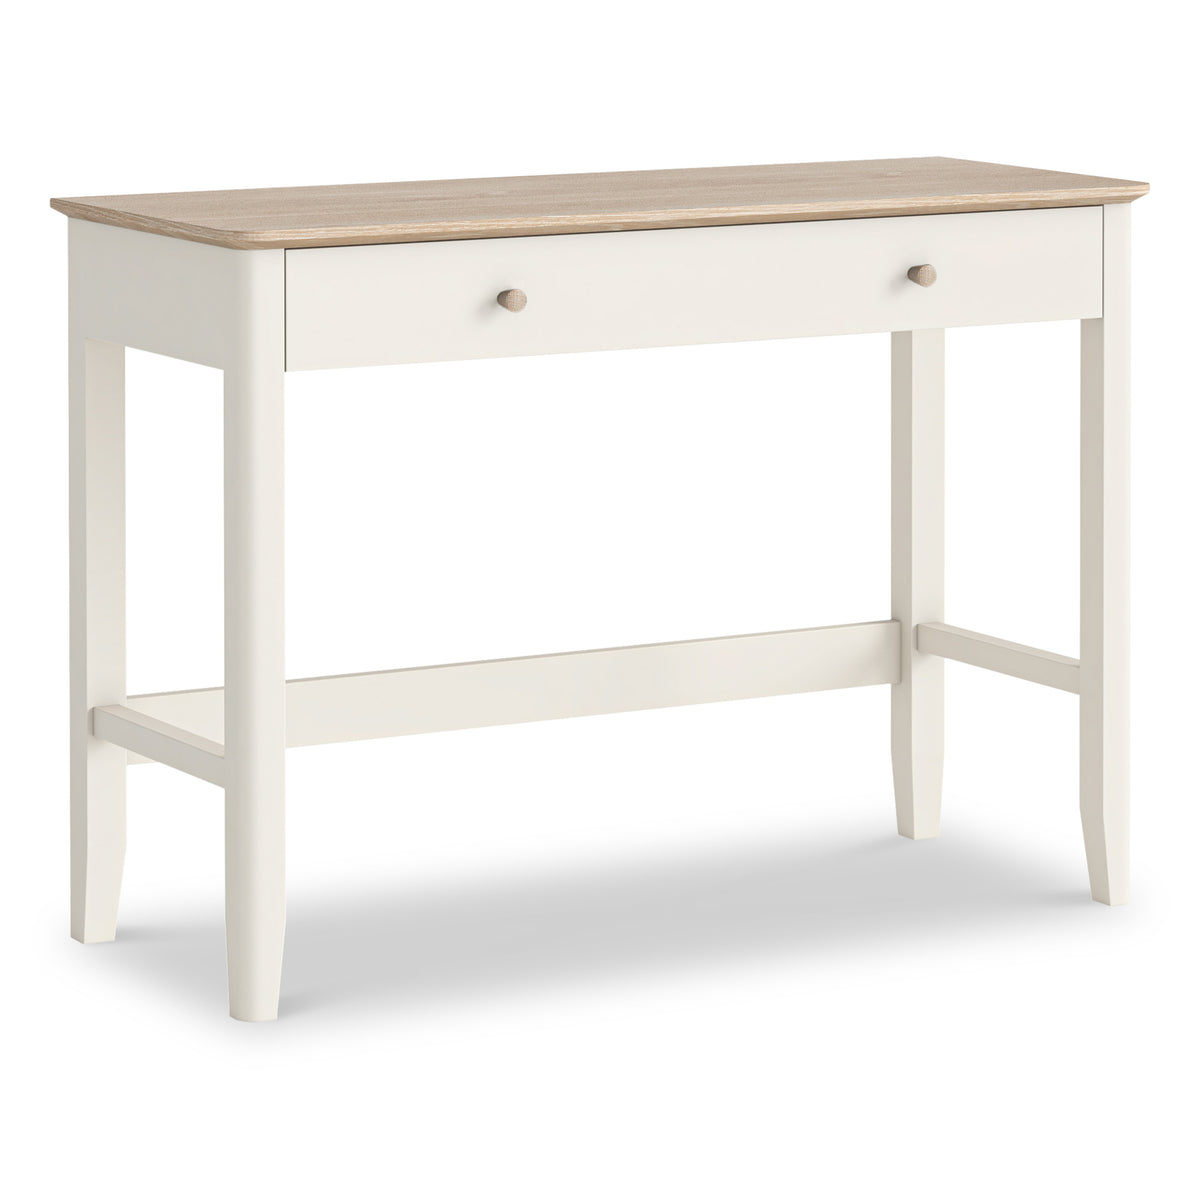 Penrose Coconut White Home Office Desk with wooden handles